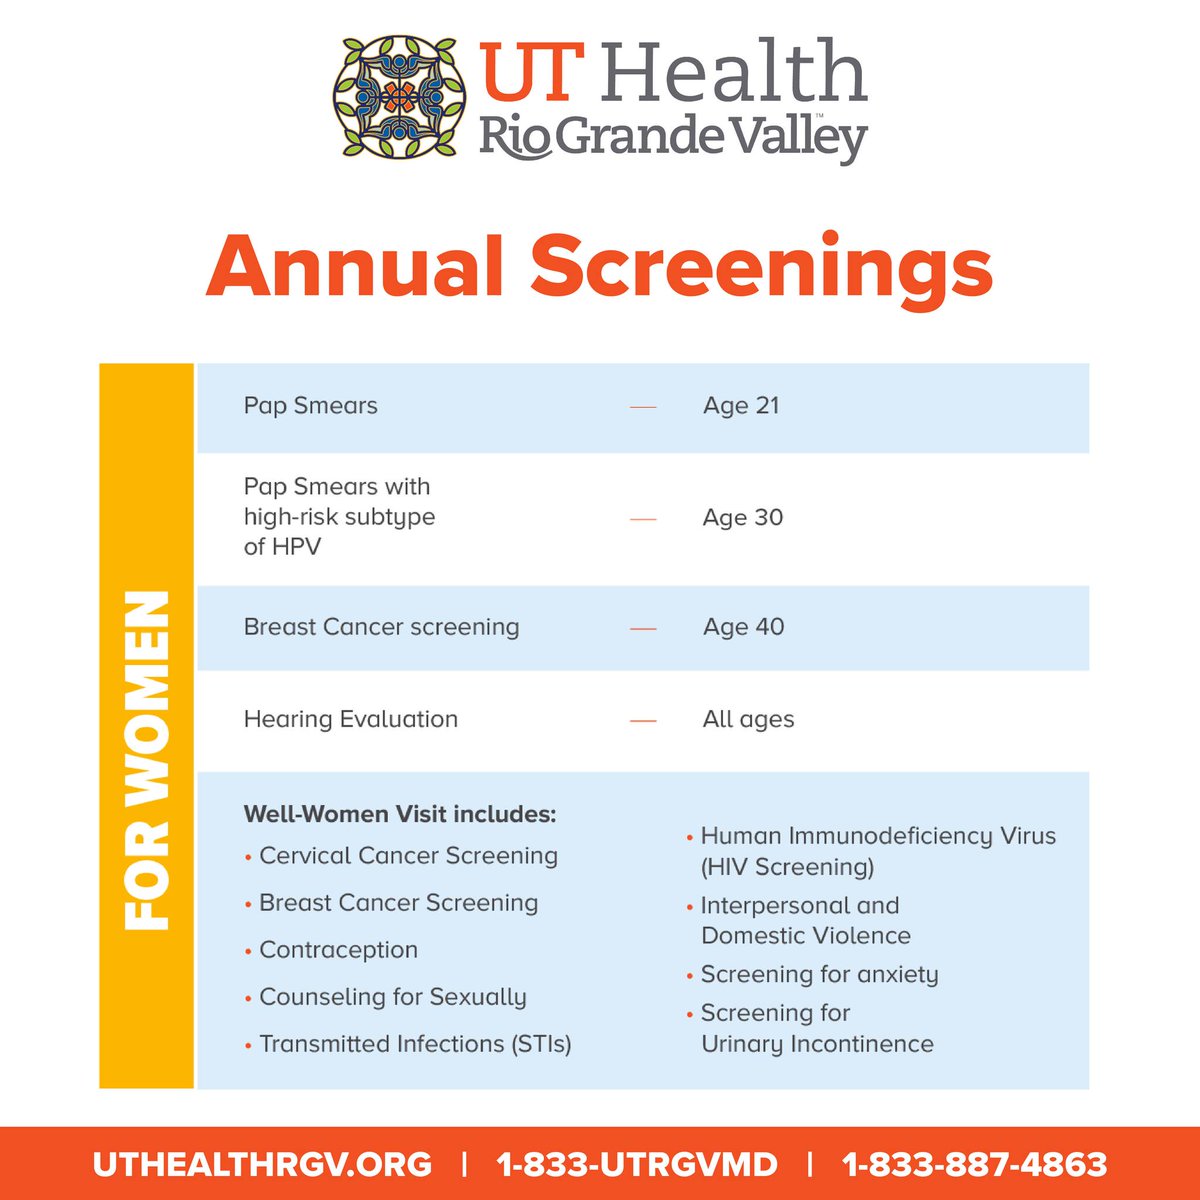 Today is #NationalWomensCheckupDay 🧡

Regular checkups are essential for early detection! Take today to prioritize your health and well-being. Check out our graphic with recommended screenings.

#UTHealthRGV